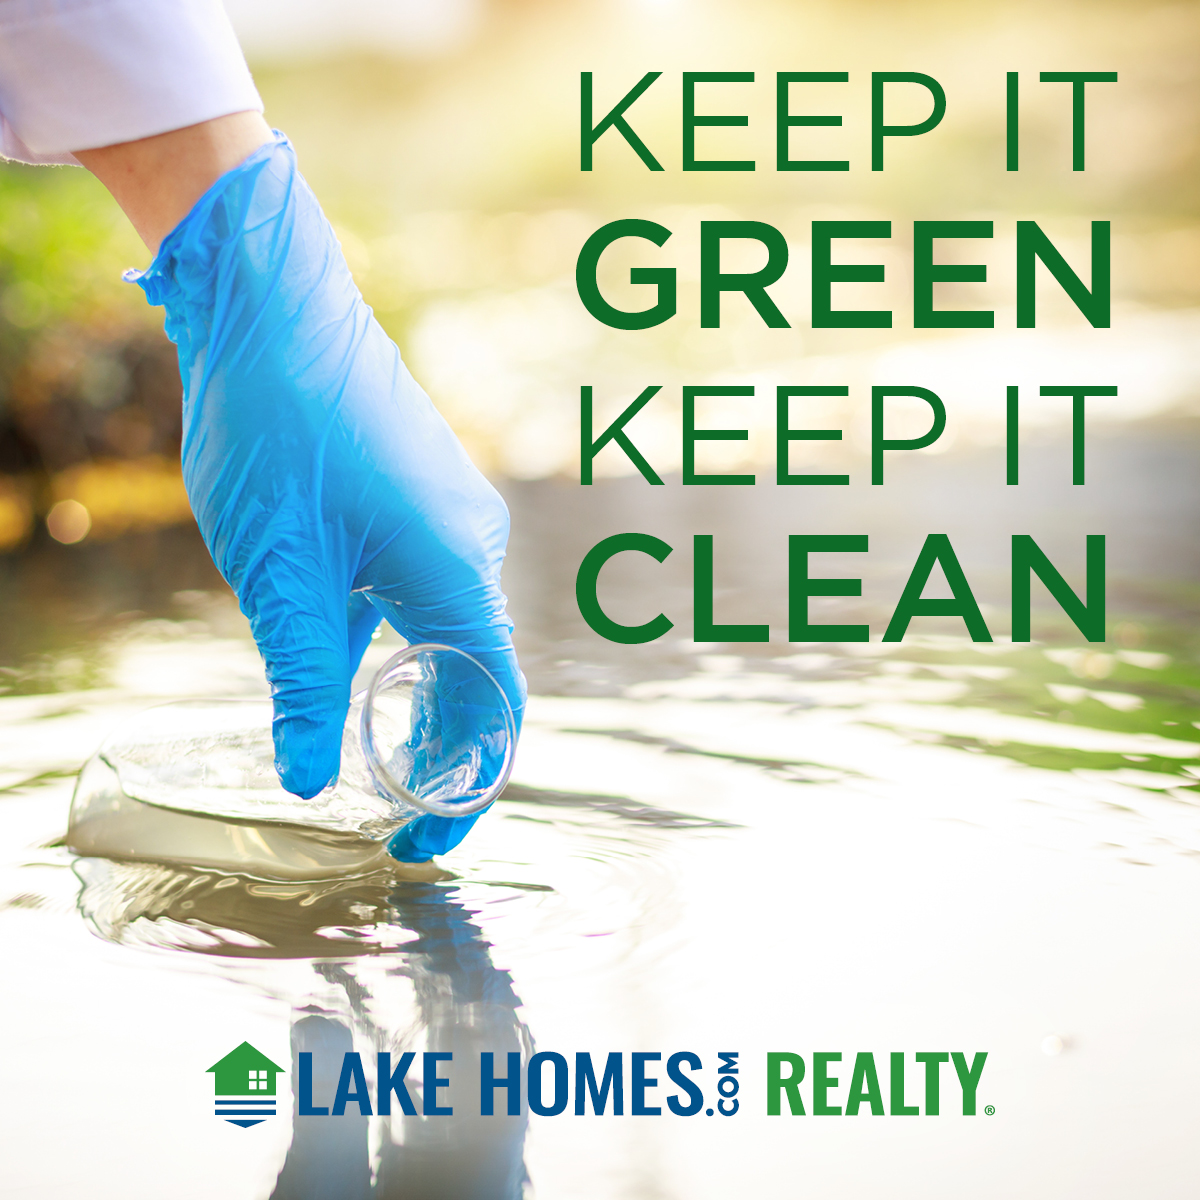 Happy Earth Day! Let's all do our part to keep the lakes clean🌎♻️

#SmithMountainLakeRealty #LakefrontStory #SmithMountainLakeLife #LakeHomes #LakeHomesRealty #LakeLife #LakeLiving #SmithMountainLake #EarthDay #HappyEarthDay #KeepItClean